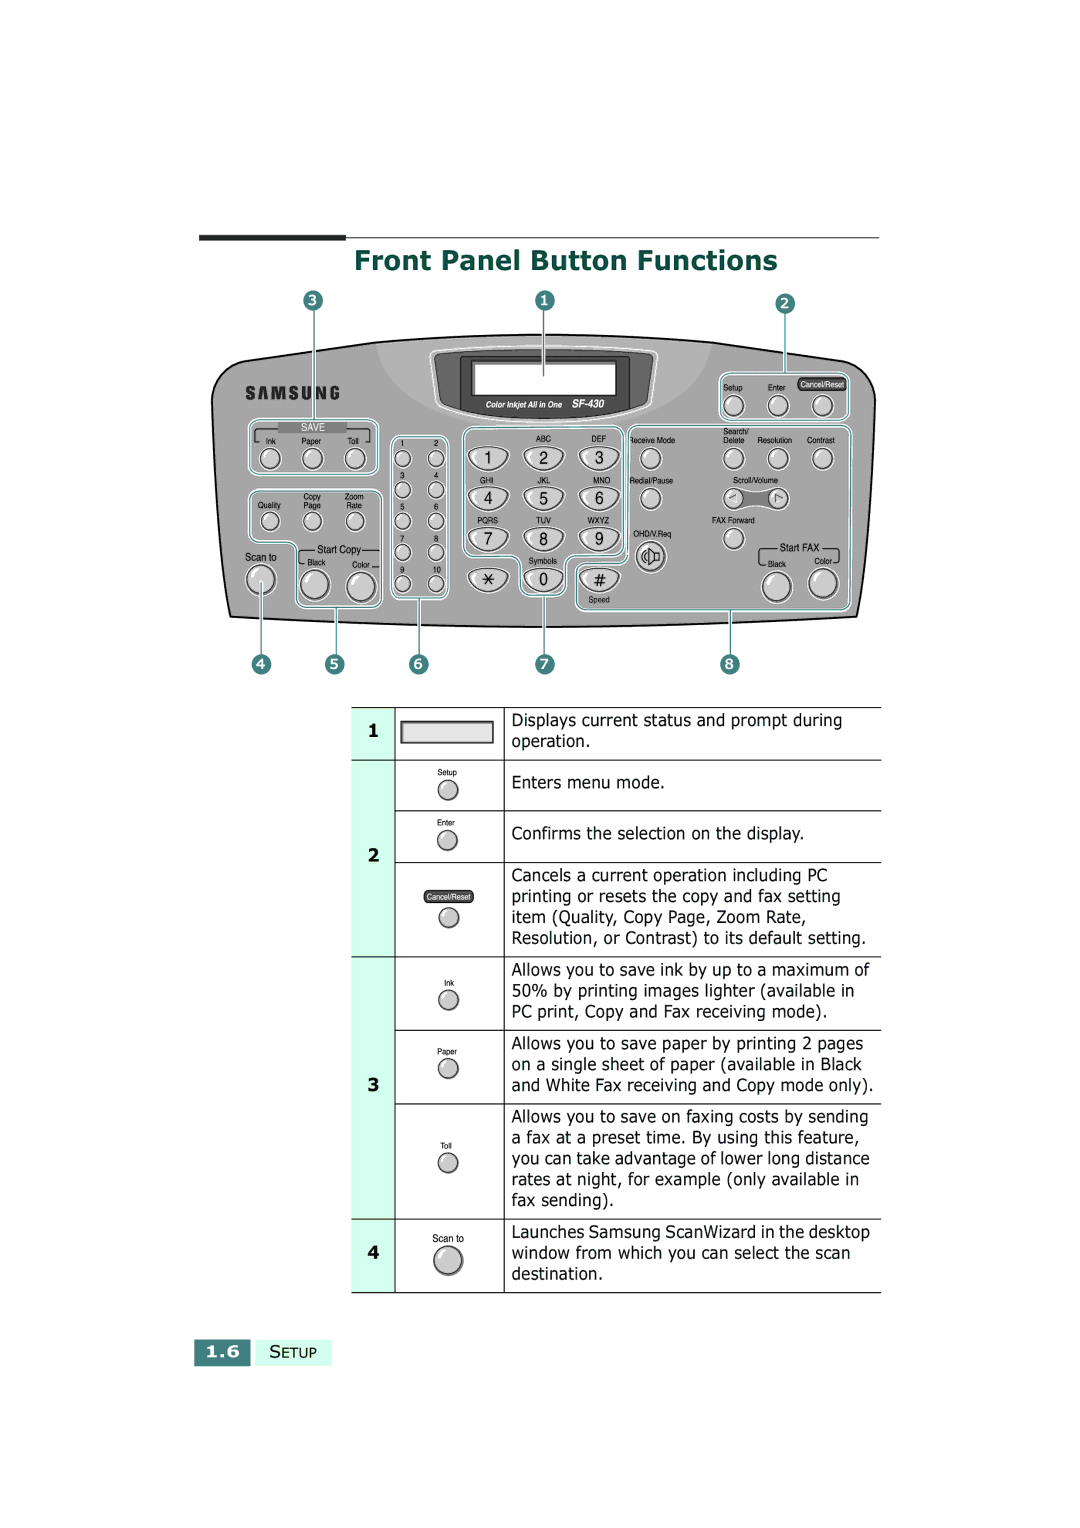 Samsung SF-430 manual Front Panel Button Functions 